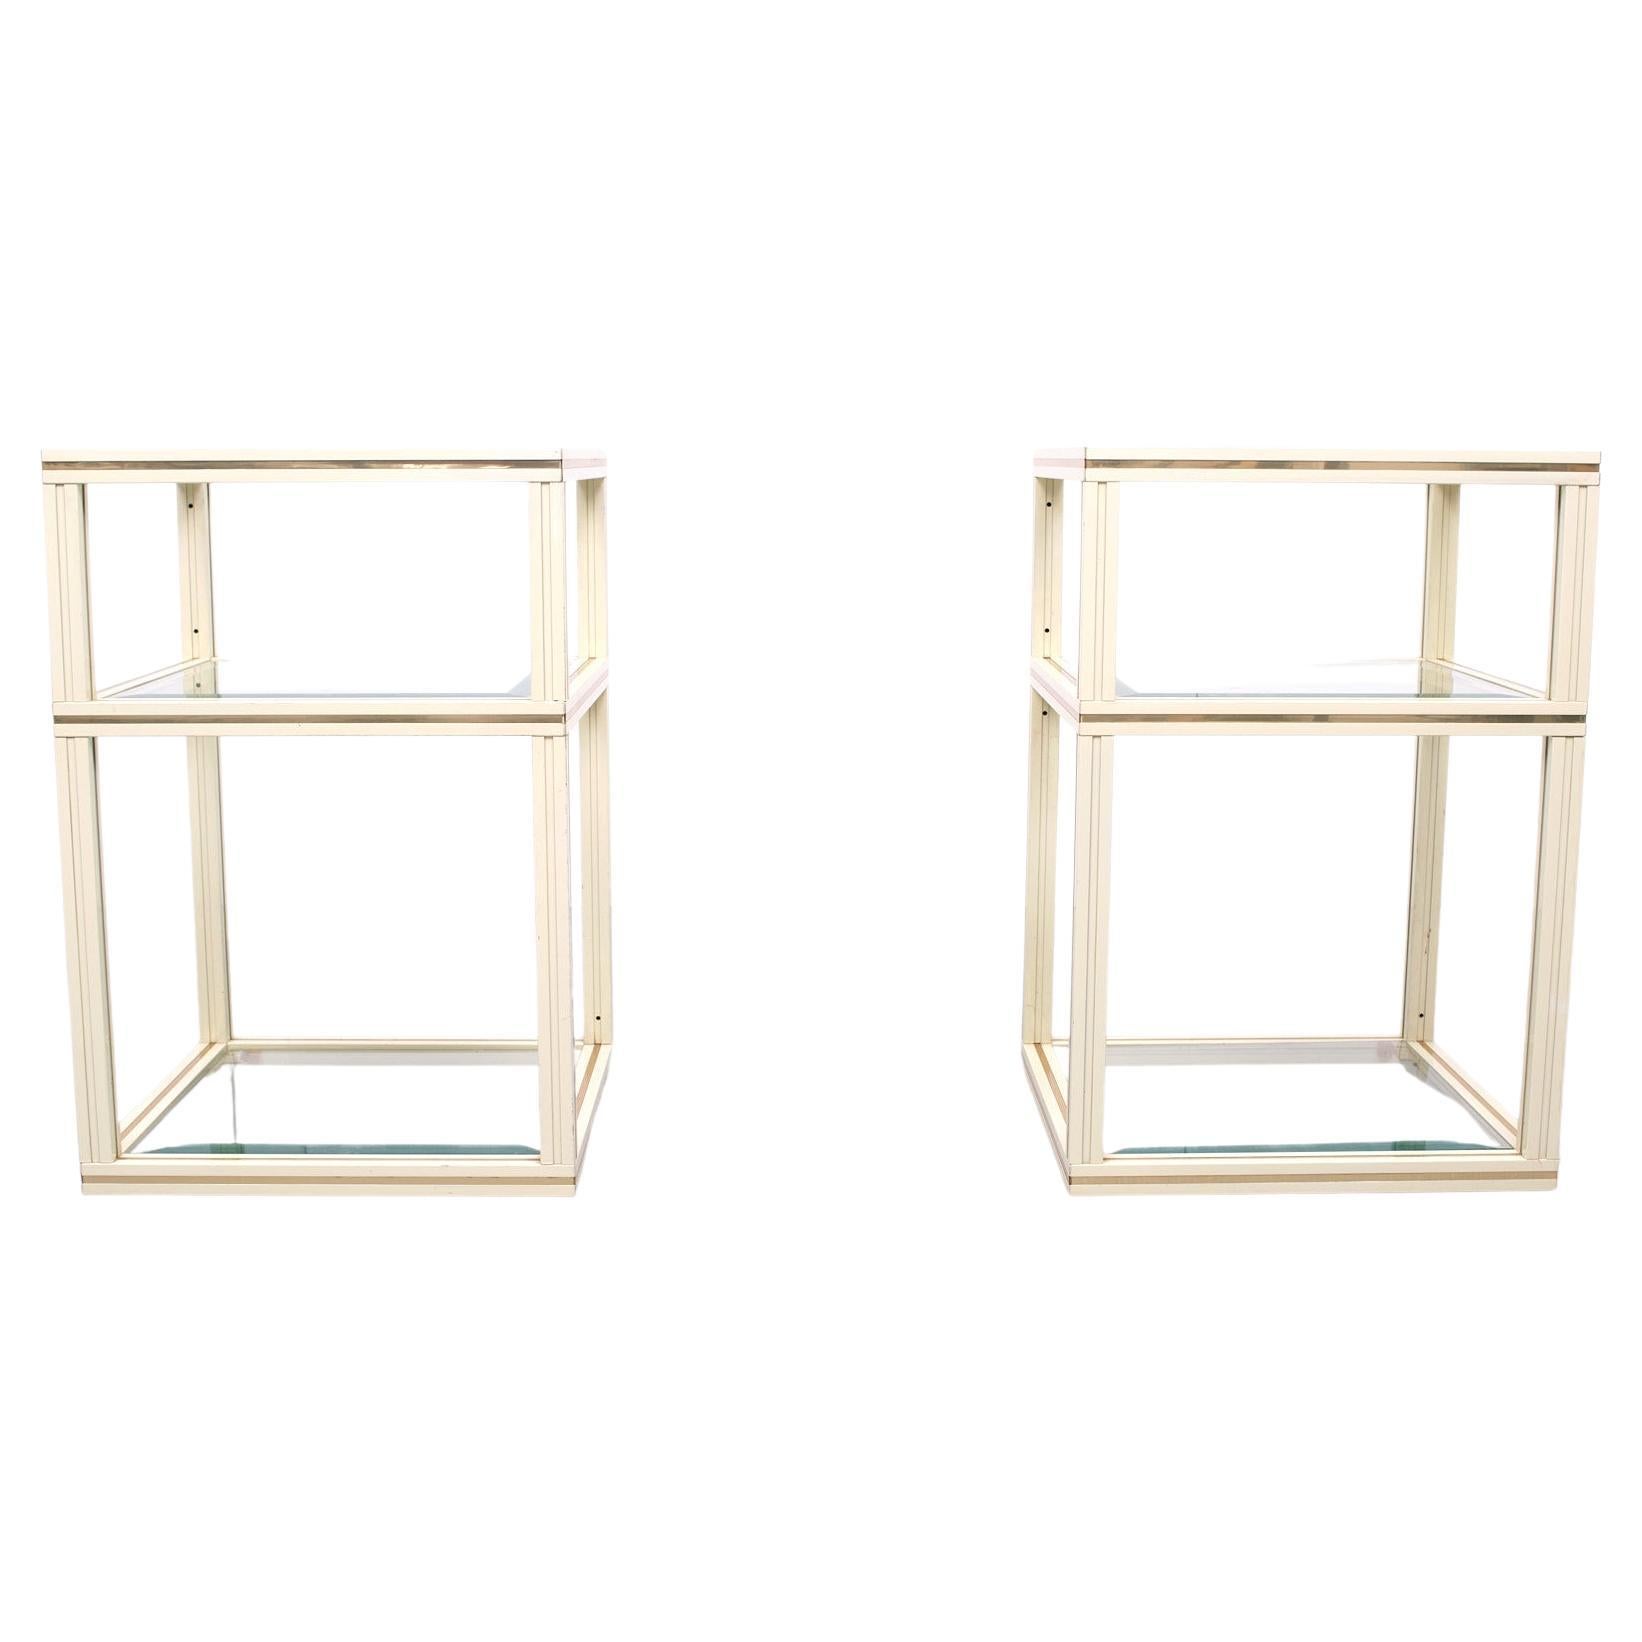 Two three tier side tables Creme color aluminum with brass details. Beveled glass tops. signed on top of the tables Pierre Vandel Paris .
lots off storage space. Normal wear and tear.
  